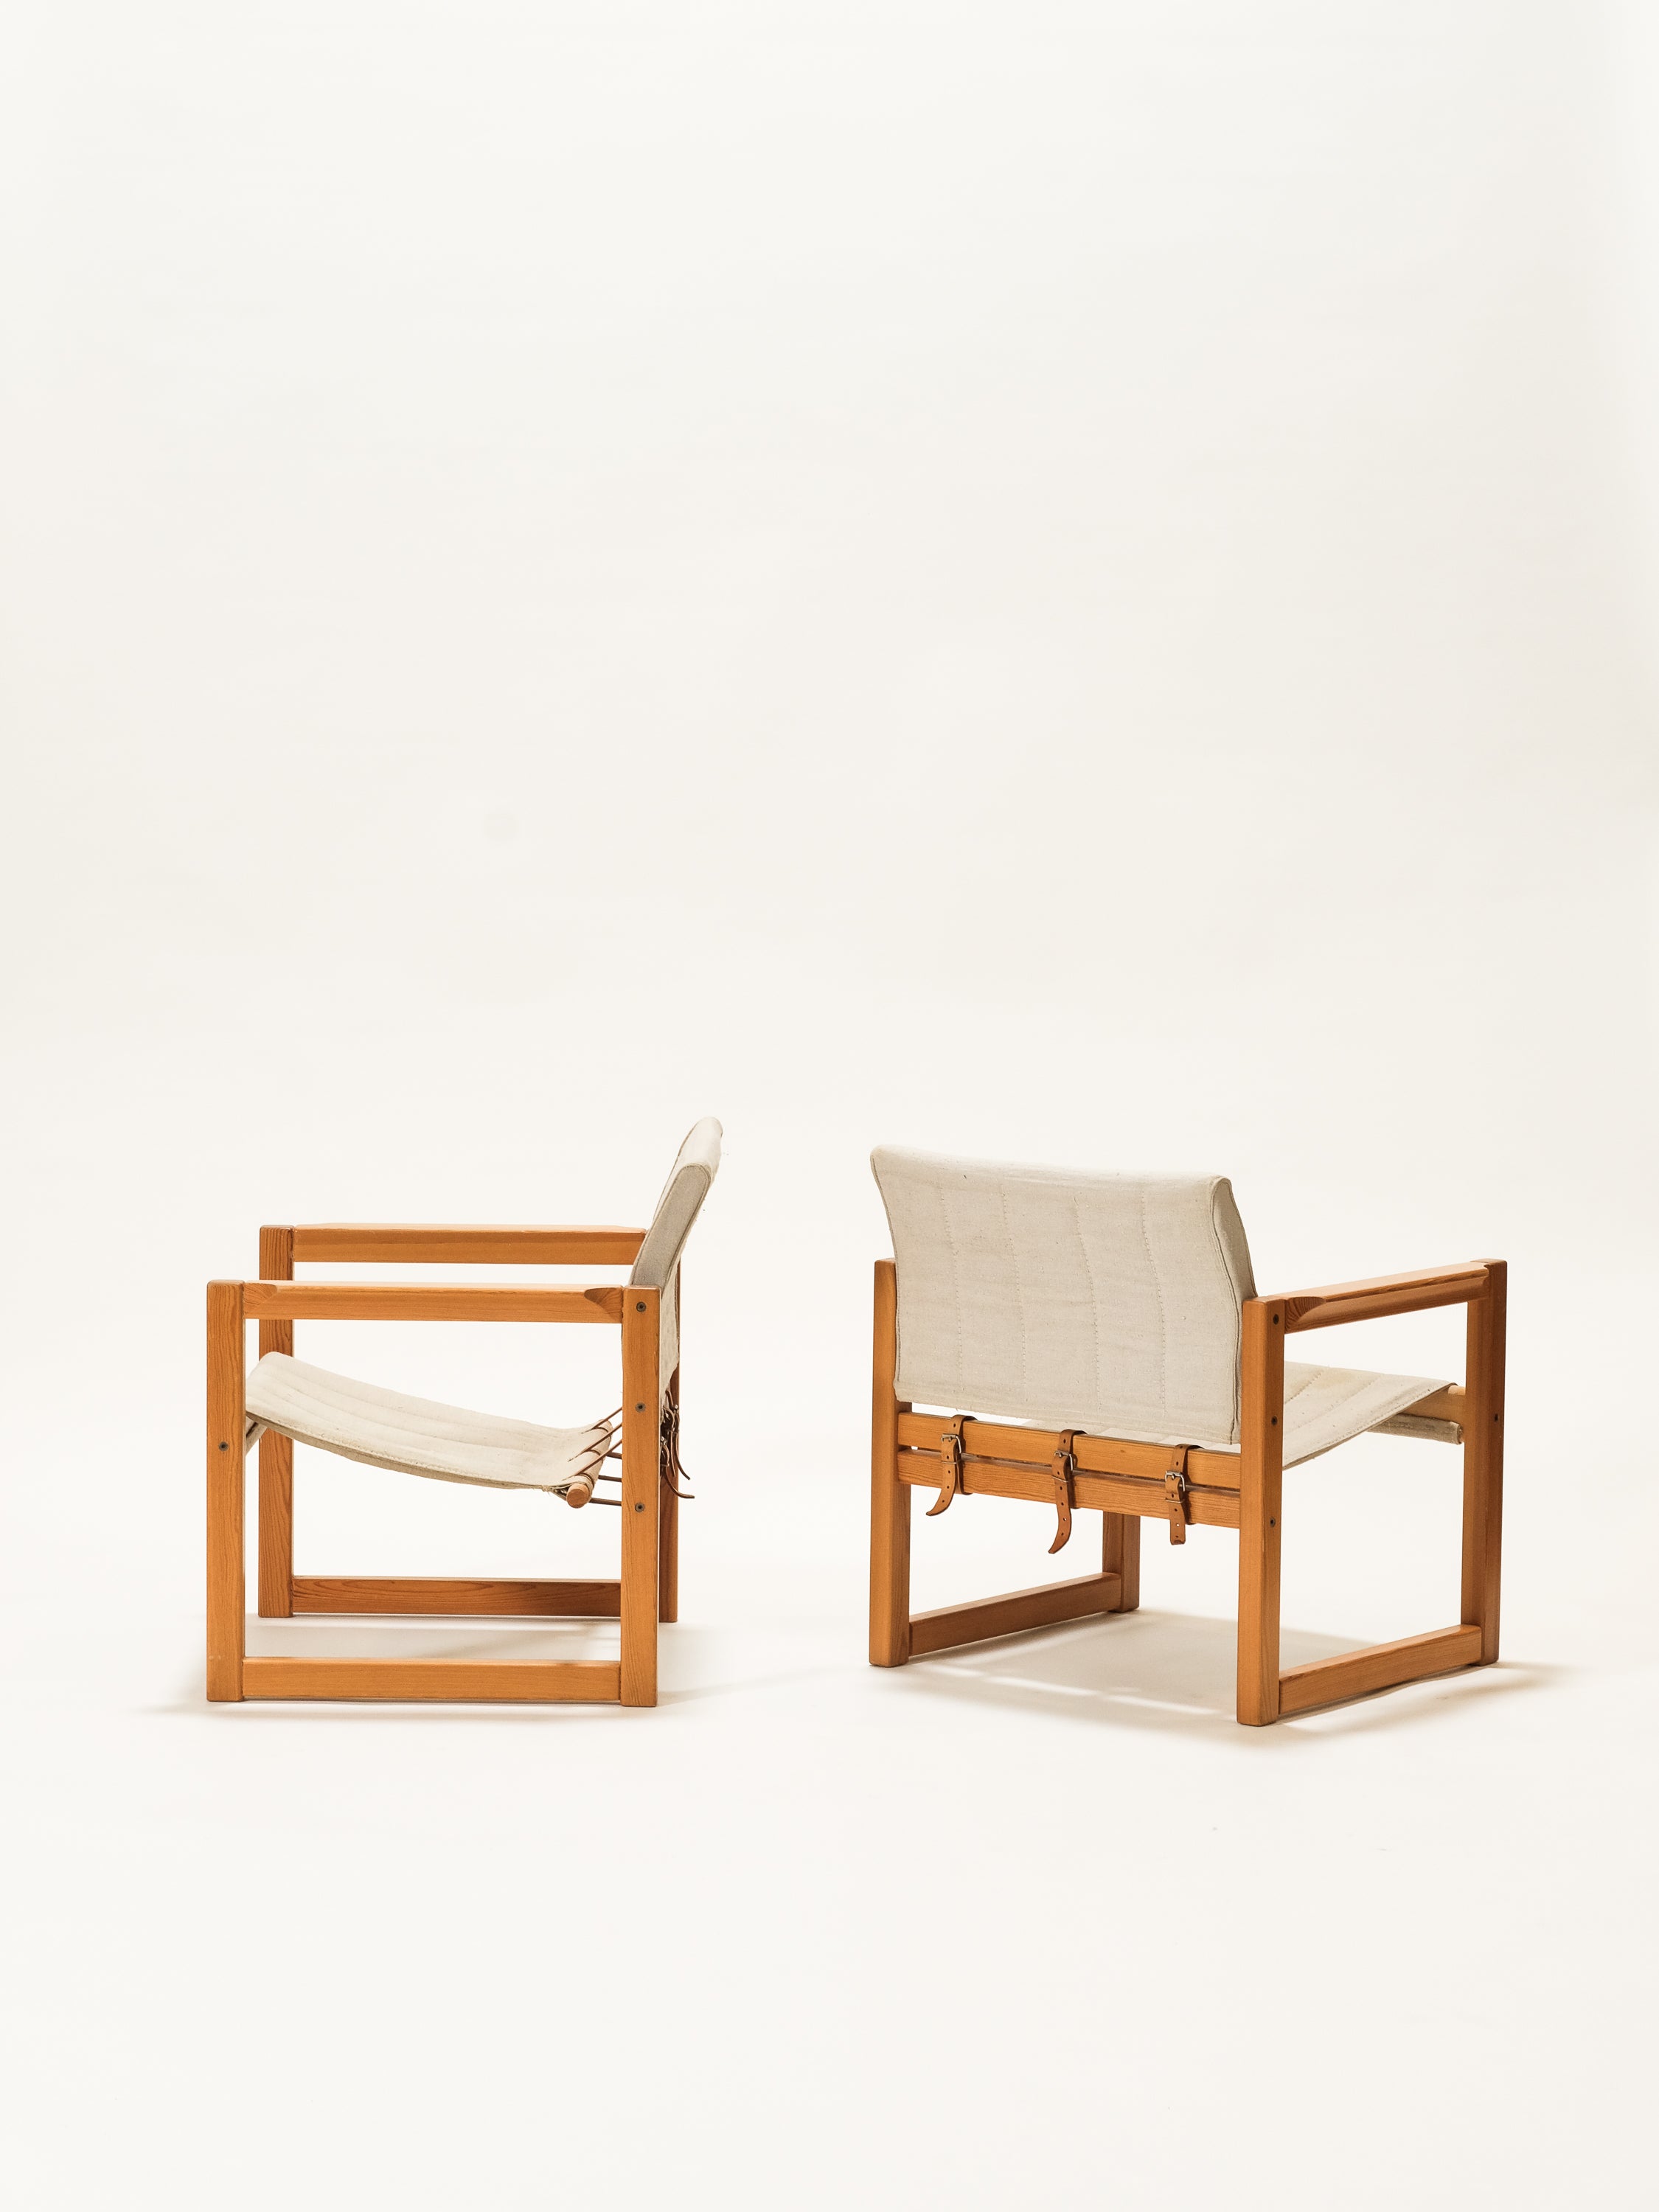 Pair of Solid Pine "Diana" Easy Chairs by Karin Mobring for Ikea, 1970s